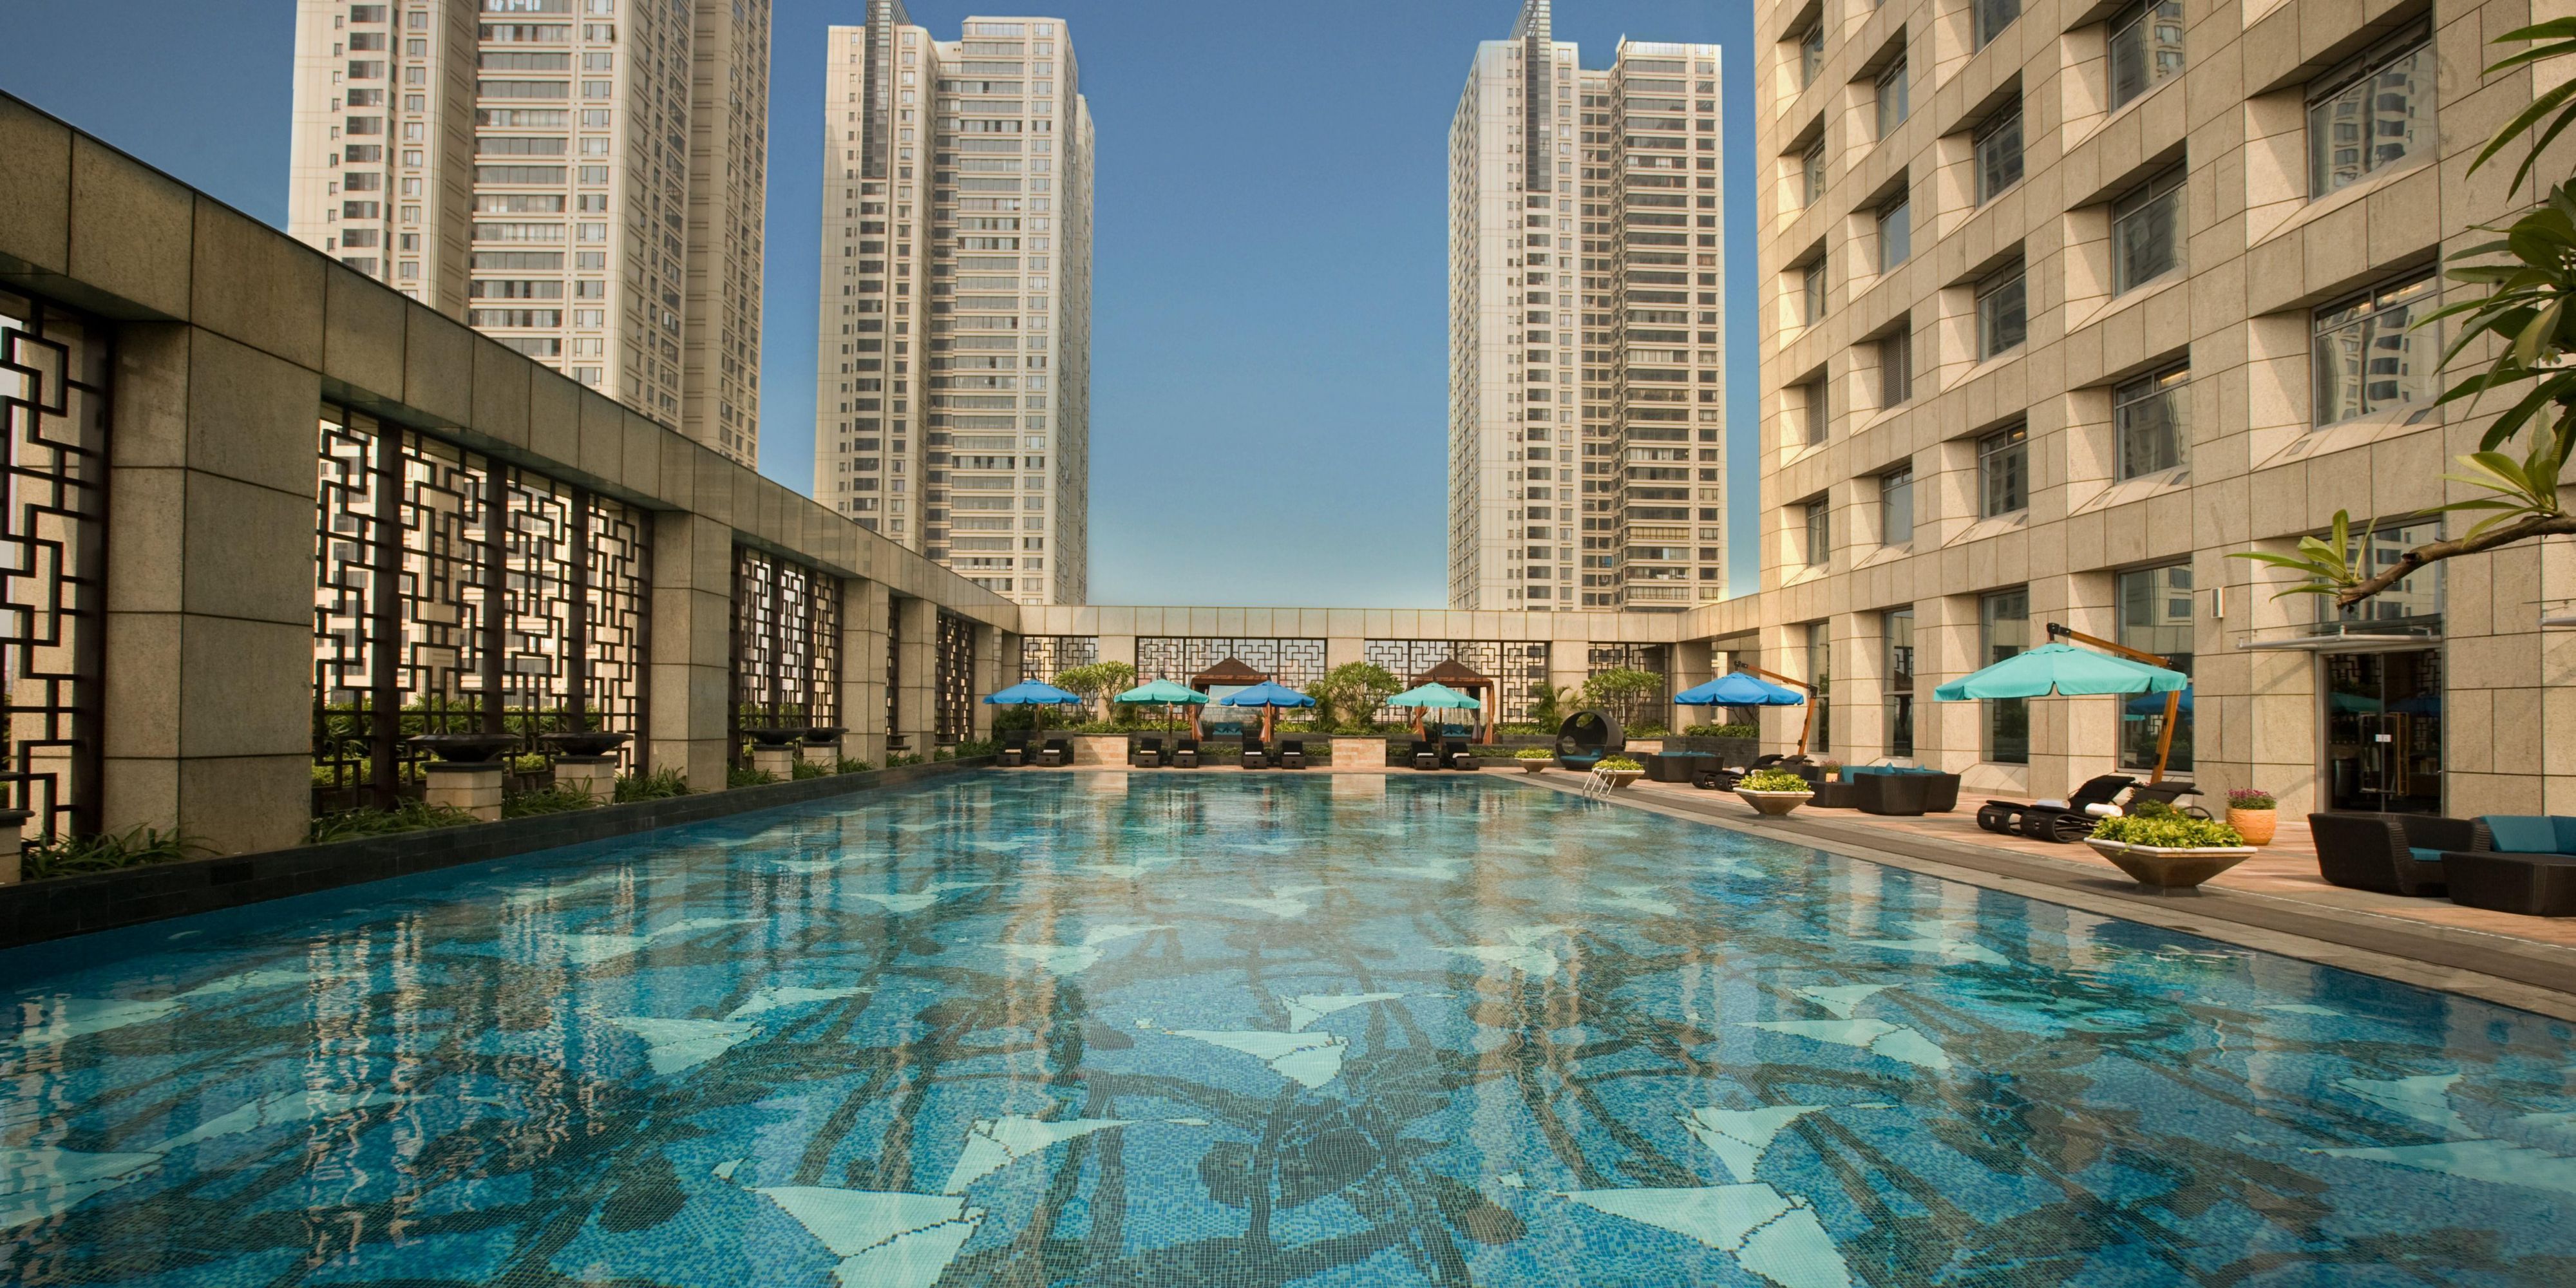 Hotel features a comprehensive range of recreational facilities such as Spa, fitness centre, an outdoor swimming pool and tennis courts. With its unique combination of beautiful views of the man made canal with elegant landscaped garden, InterContinental Foshan also delivers the enriching experience for leisure.